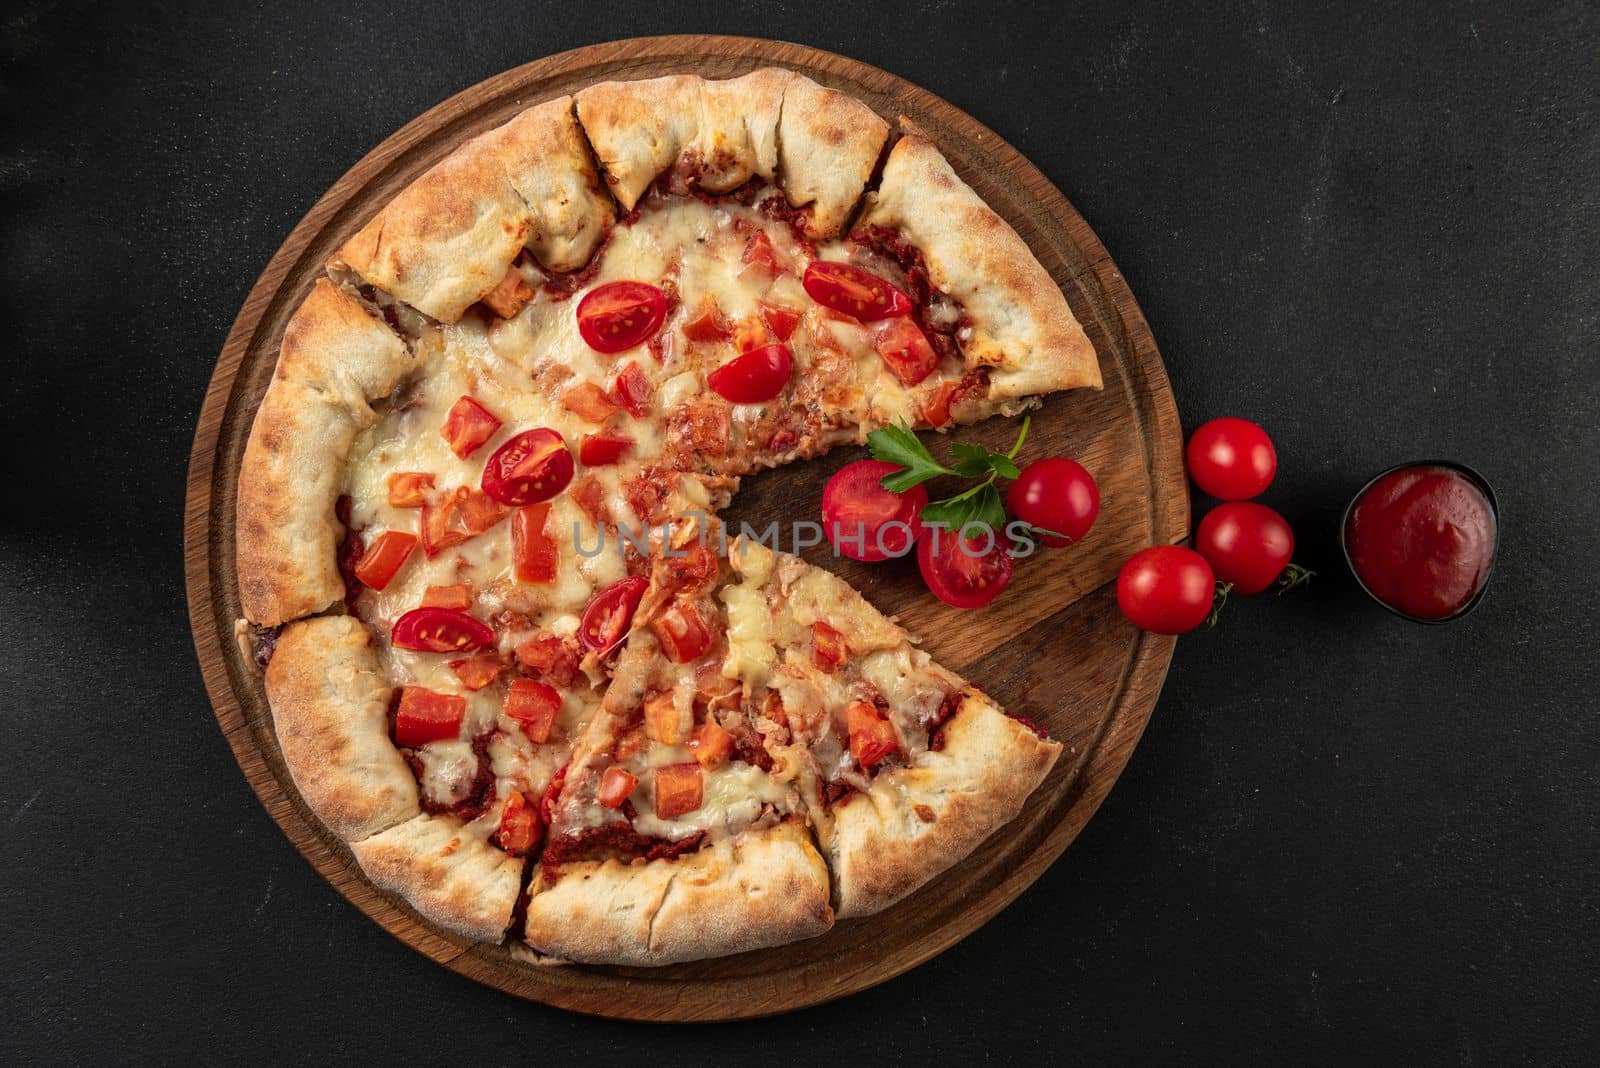 Cooked pizza with ingredients next to make tomato sauce, mozzarella, tomatoes, olive oil, cheese, spices, served on a rustic wooden table. Flat form. Italian margarita pizza. by gulyaevstudio